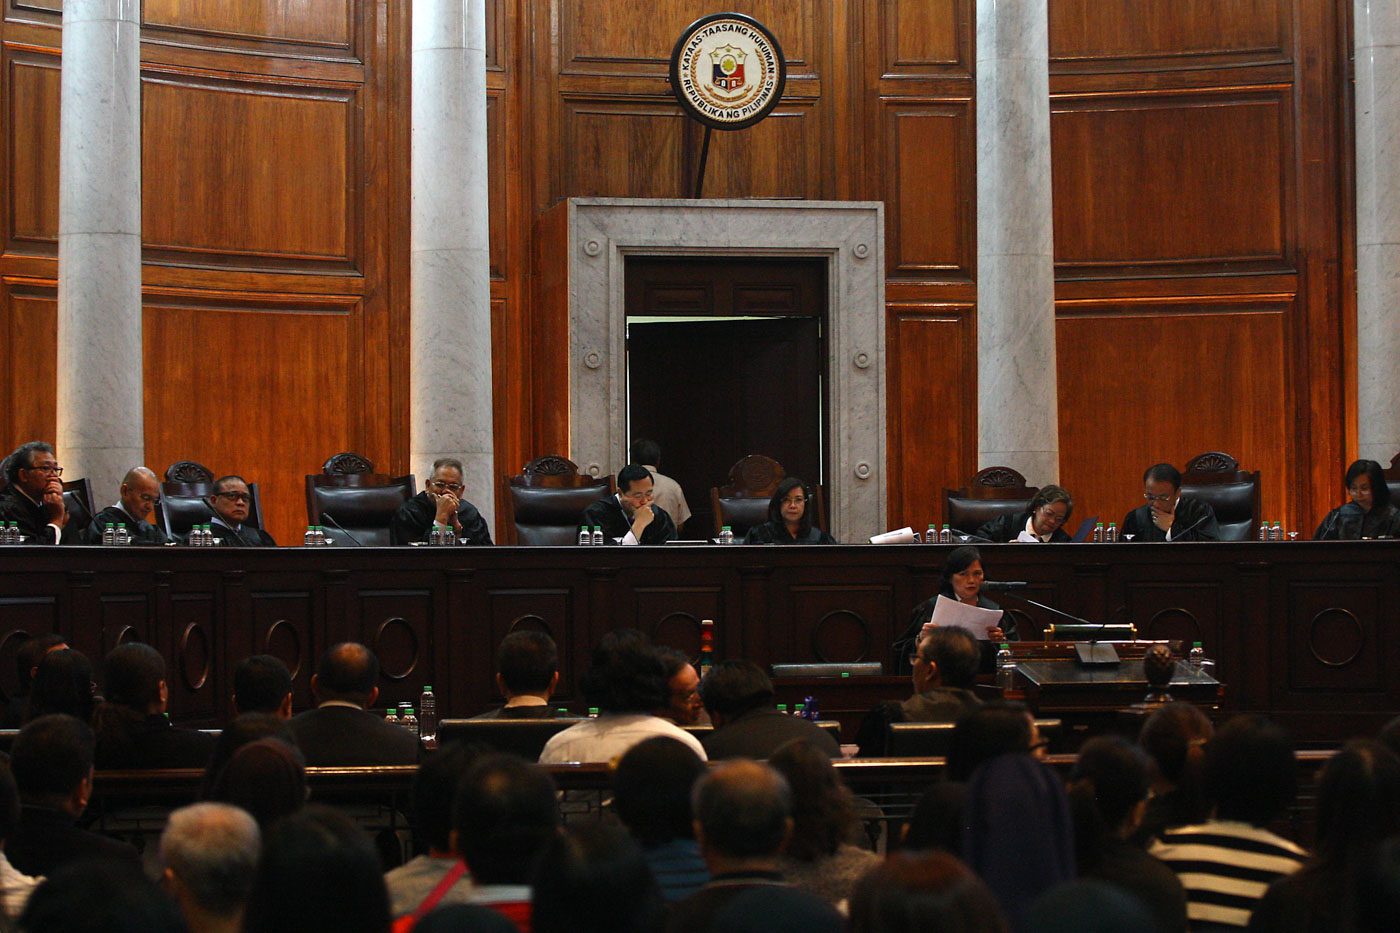 HIGHLIGHTS: What was discussed in SC oral arguments on drug war?